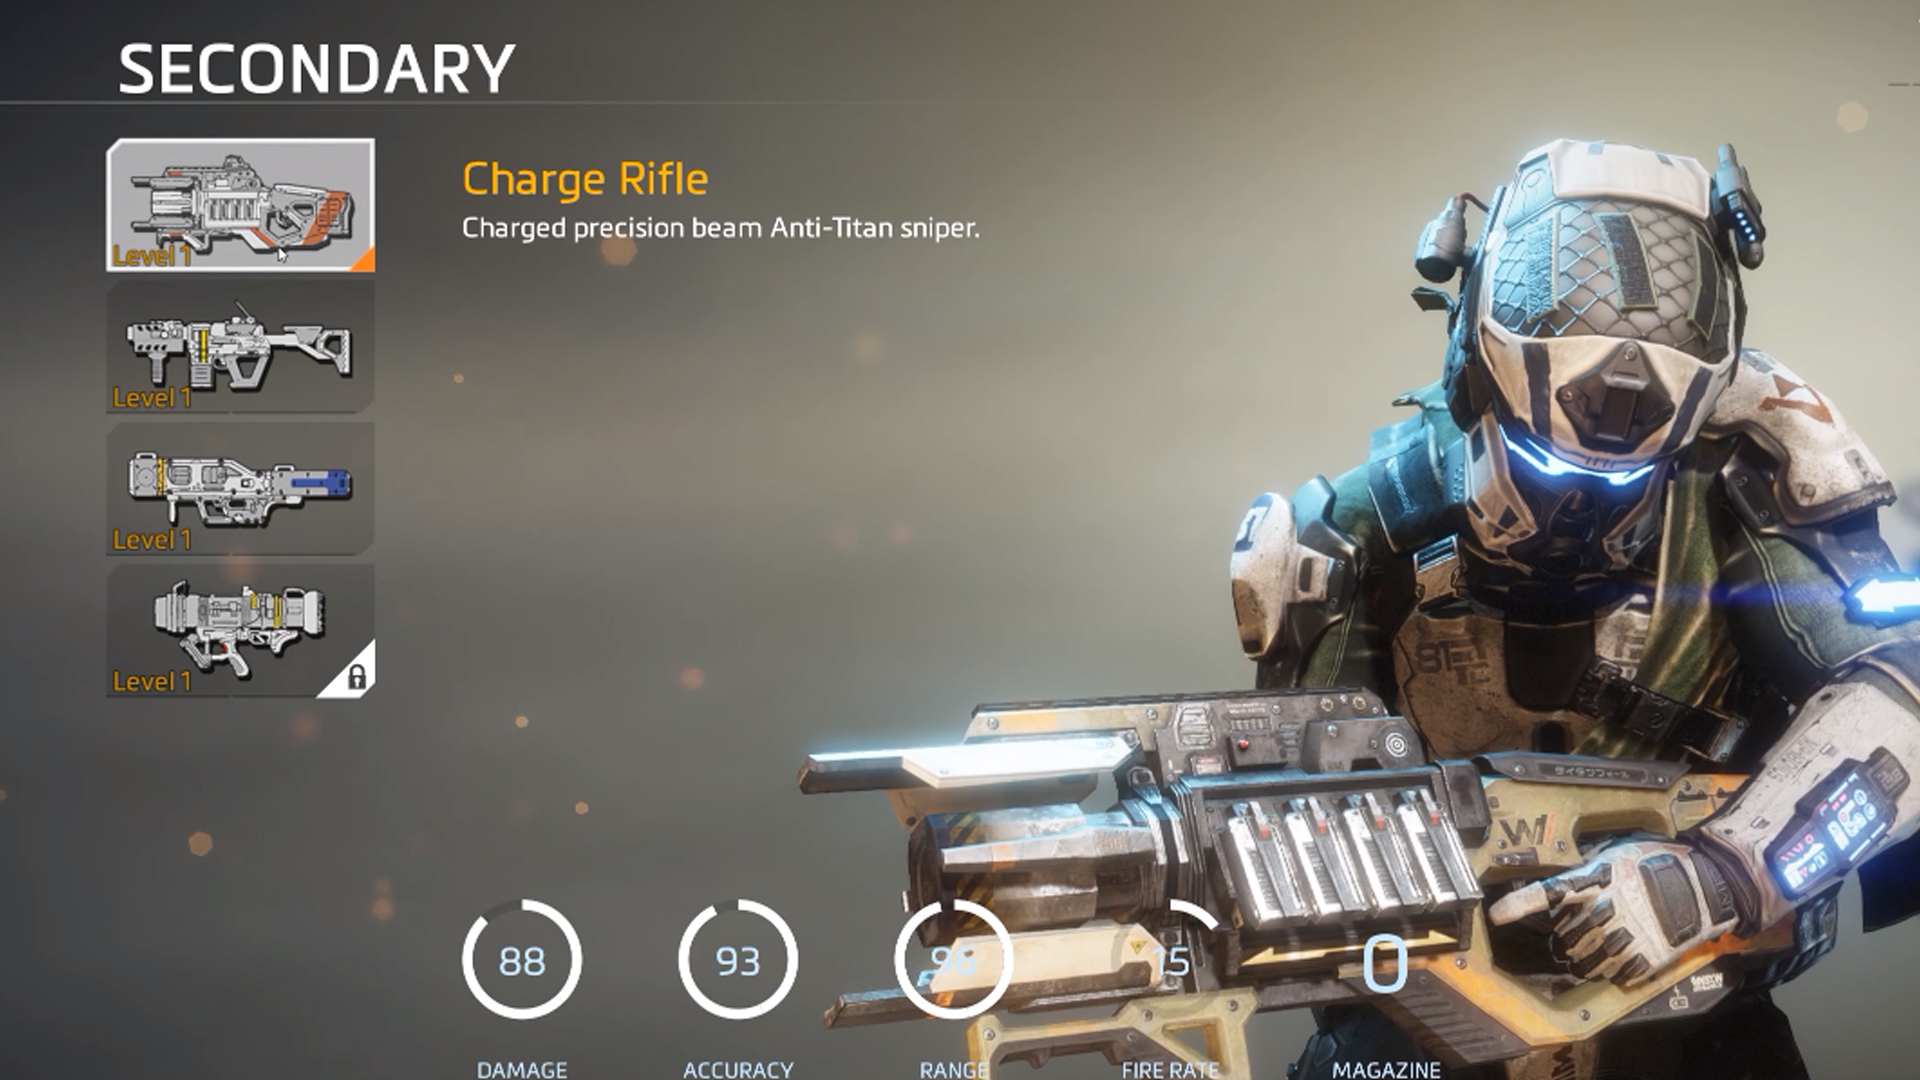 Secondary - Charge Rifle